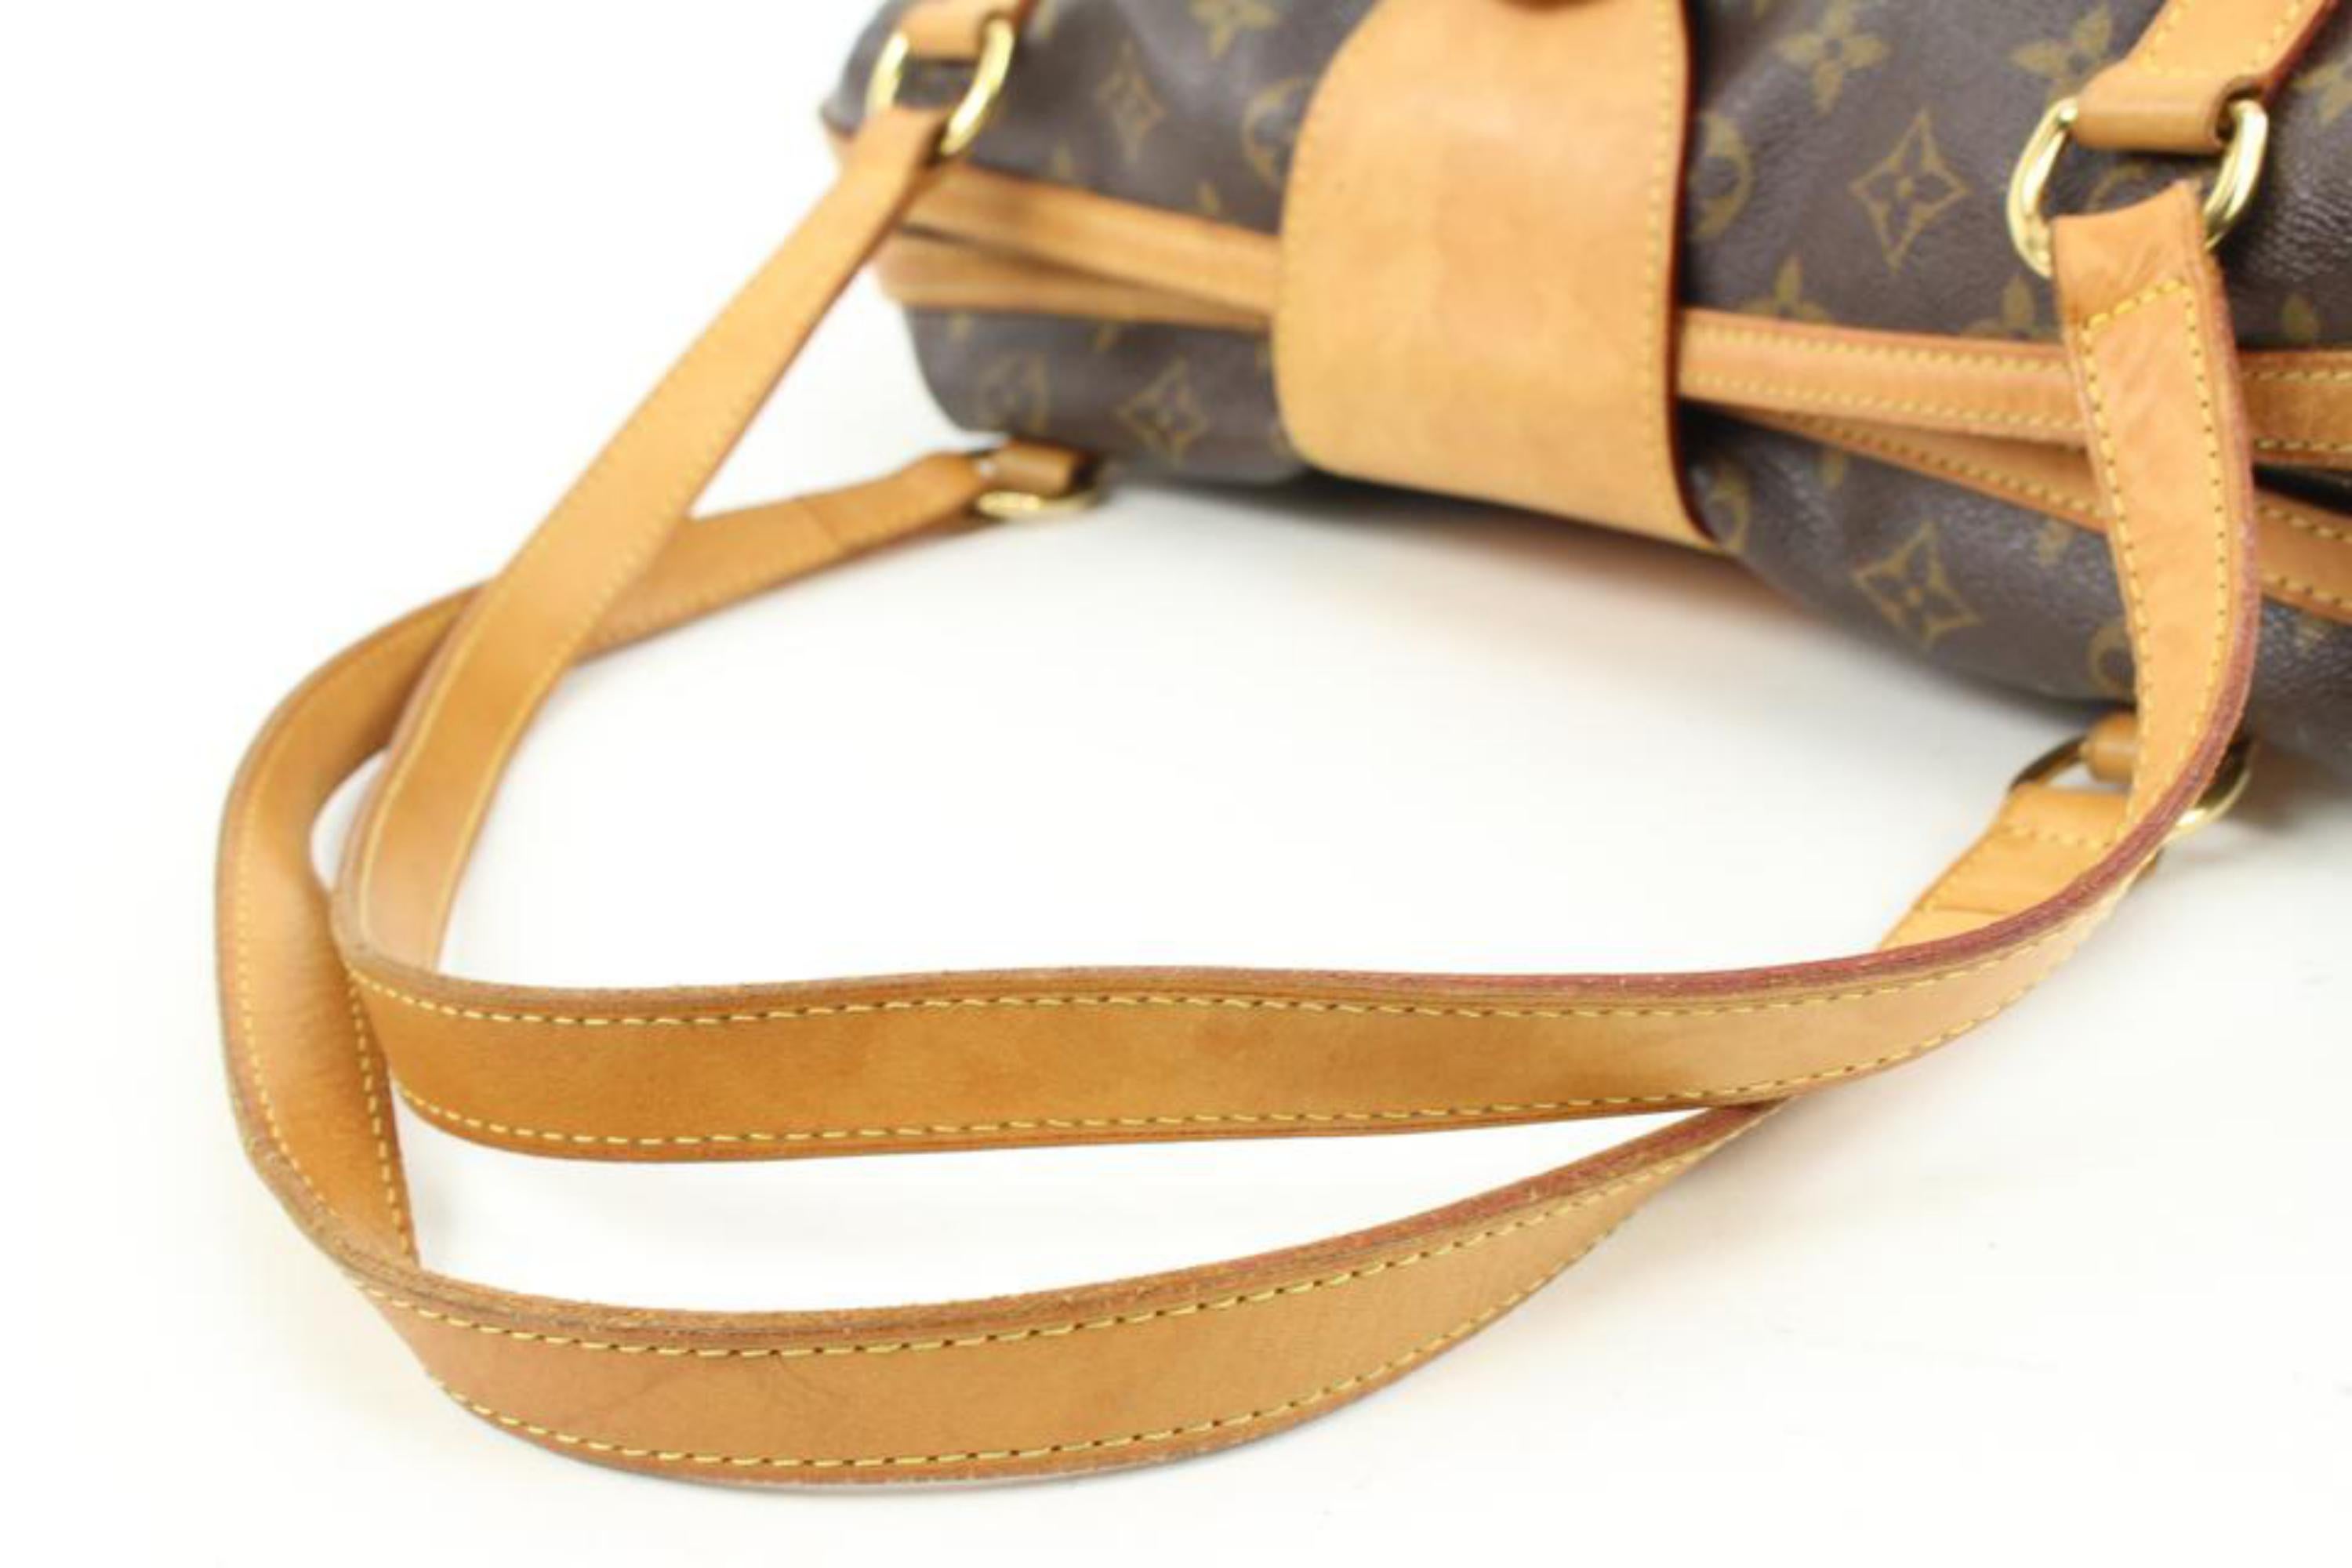 Louis Vuitton Monogram Stresa PM Bowling Shoulder Bag 121lv50 In Good Condition For Sale In Dix hills, NY